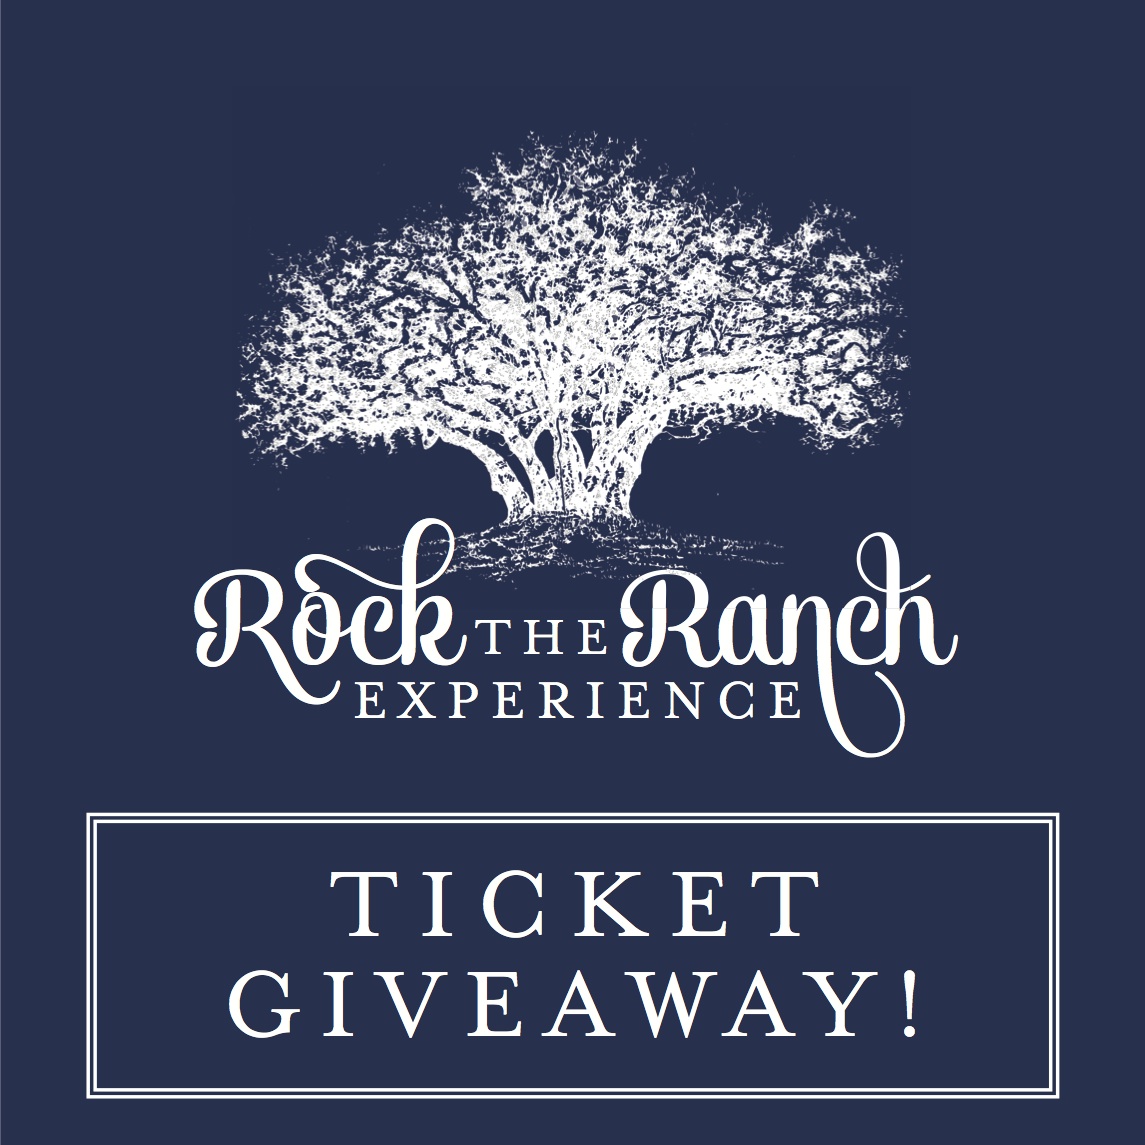 Florida Brides: Win Tickets To The Rock The Ranch Experience via TheELD.com